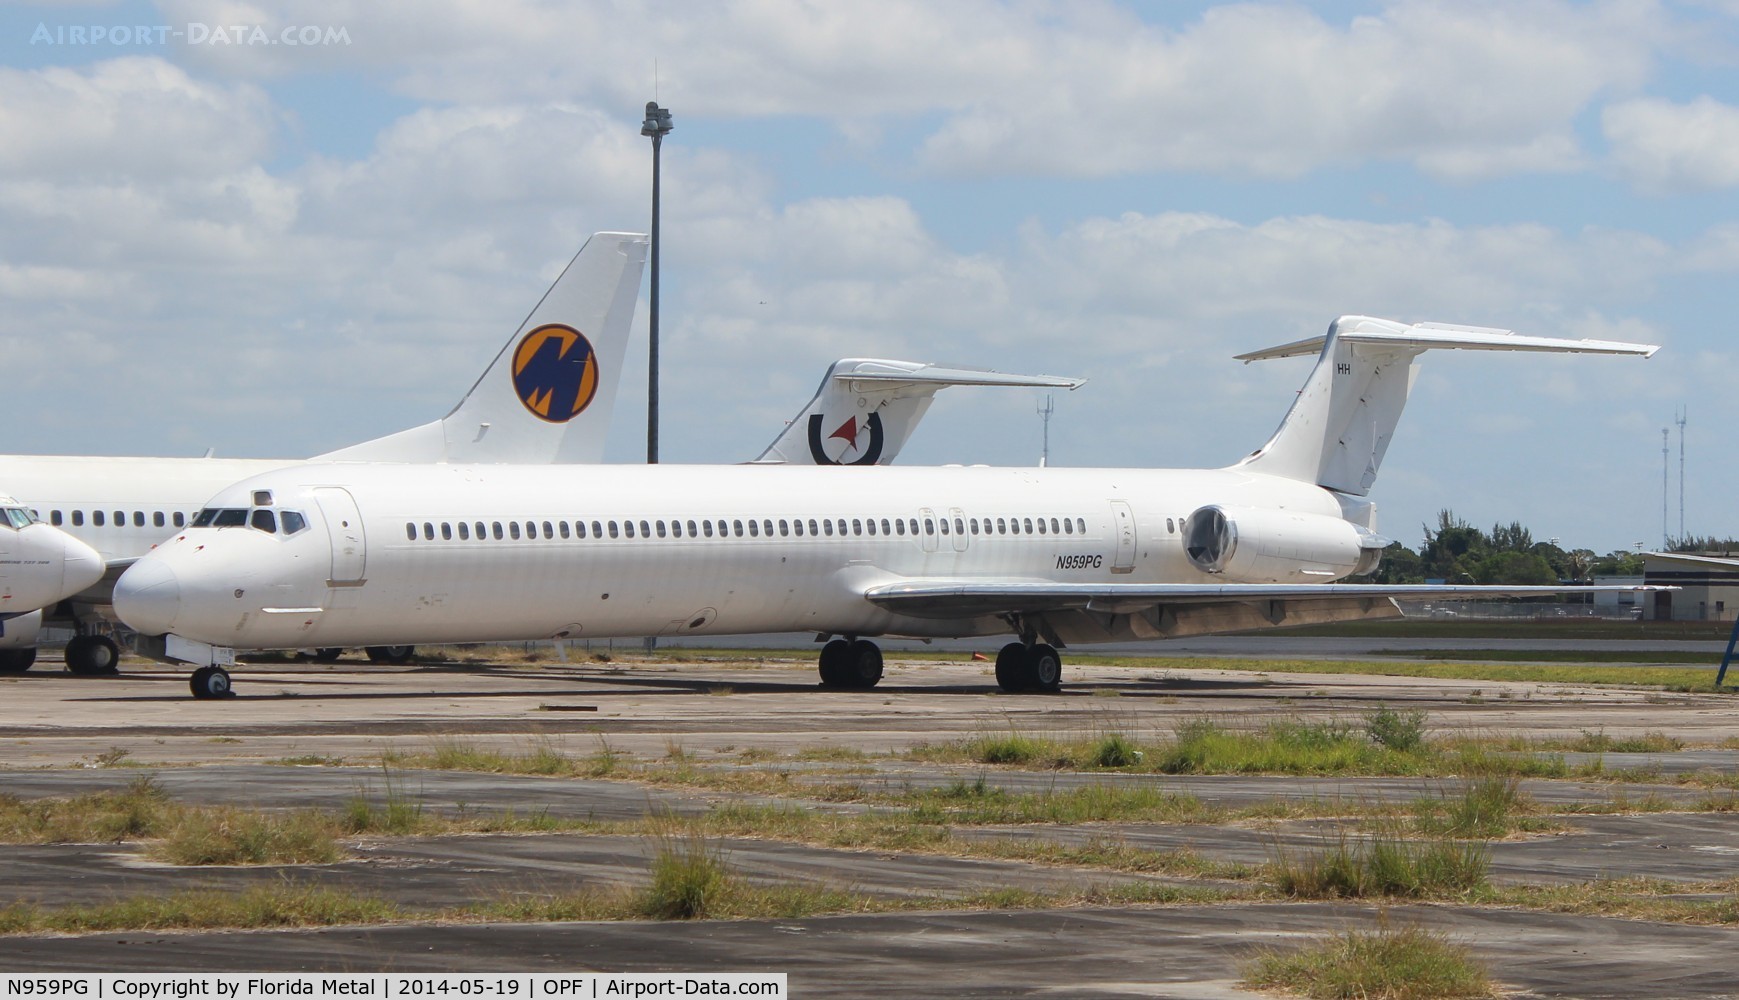 N959PG, 1989 McDonnell Douglas MD-83 (DC-9-83) C/N 49741, unmarked MD-83, ex Austral Lineass Aereas